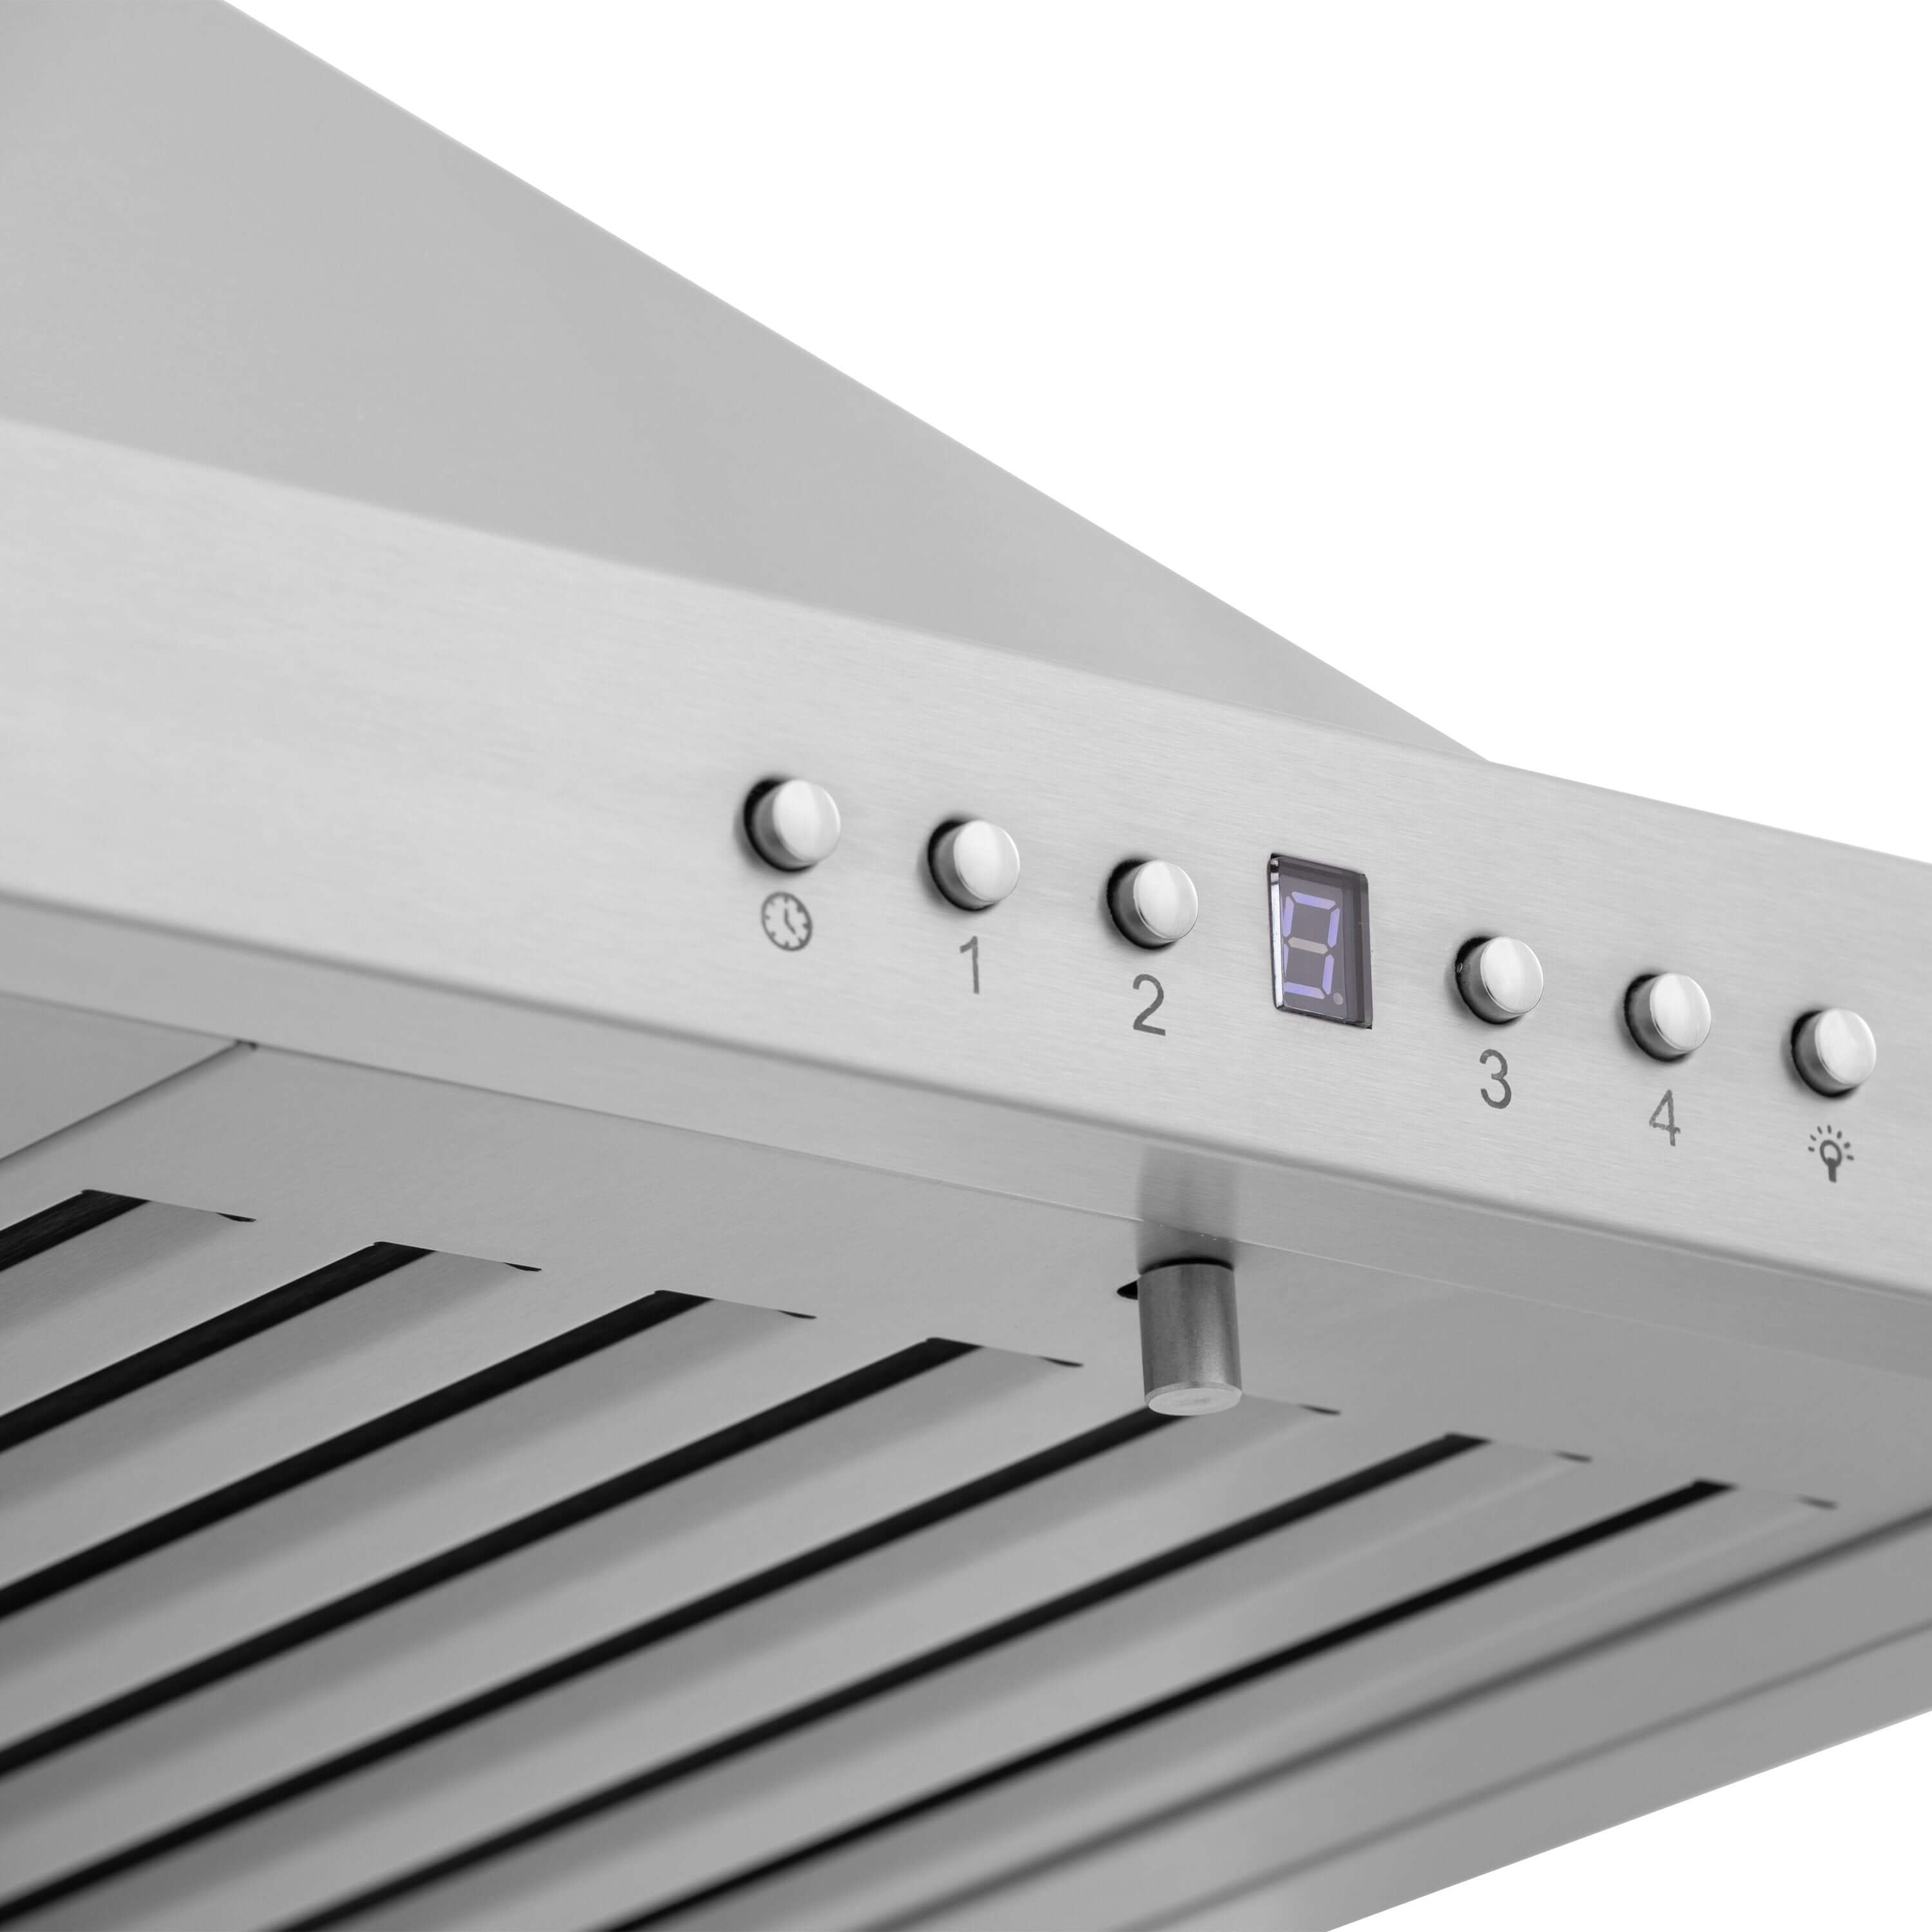 ZLINE 36 in. Recirculating Wall Mount Range Hood with Charcoal Filters in Stainless Steel (KB-CF-36) fan and lighting control buttons.